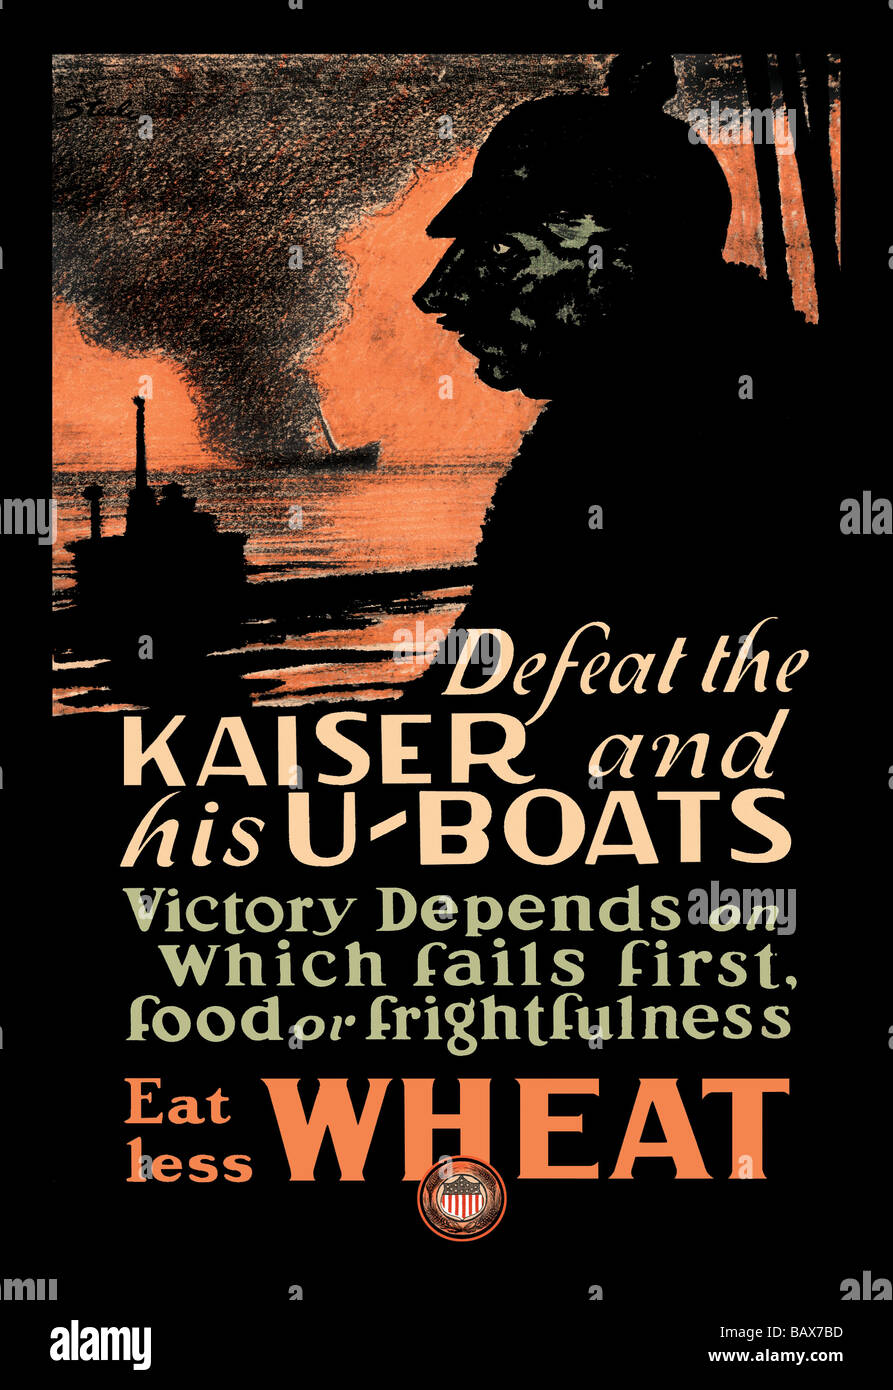 Defeat the Kaiser and His U-Boats - Eat Less Wheat Stock Photo